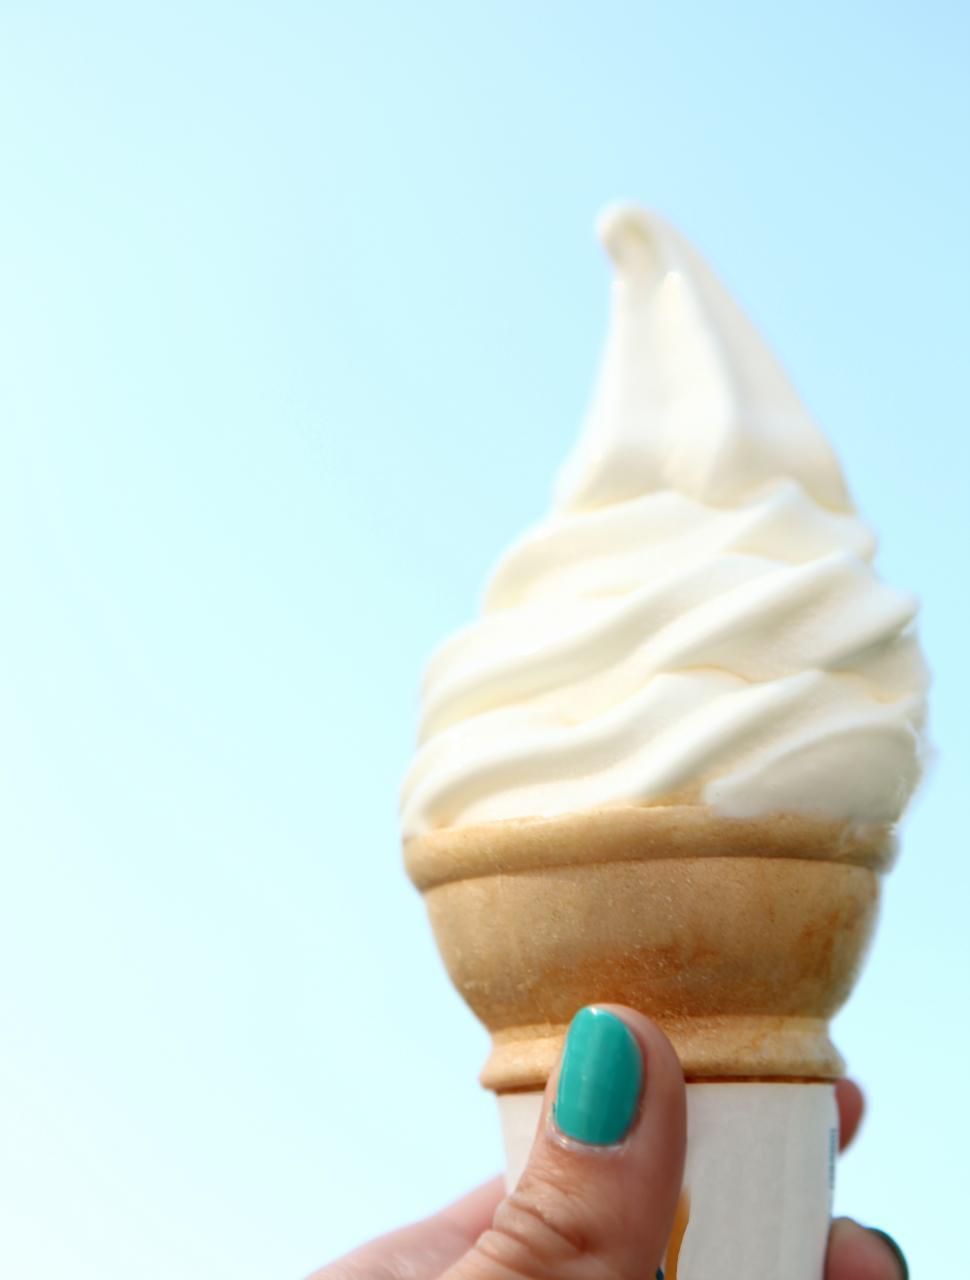 Free Image of Ice cream cone in hand 